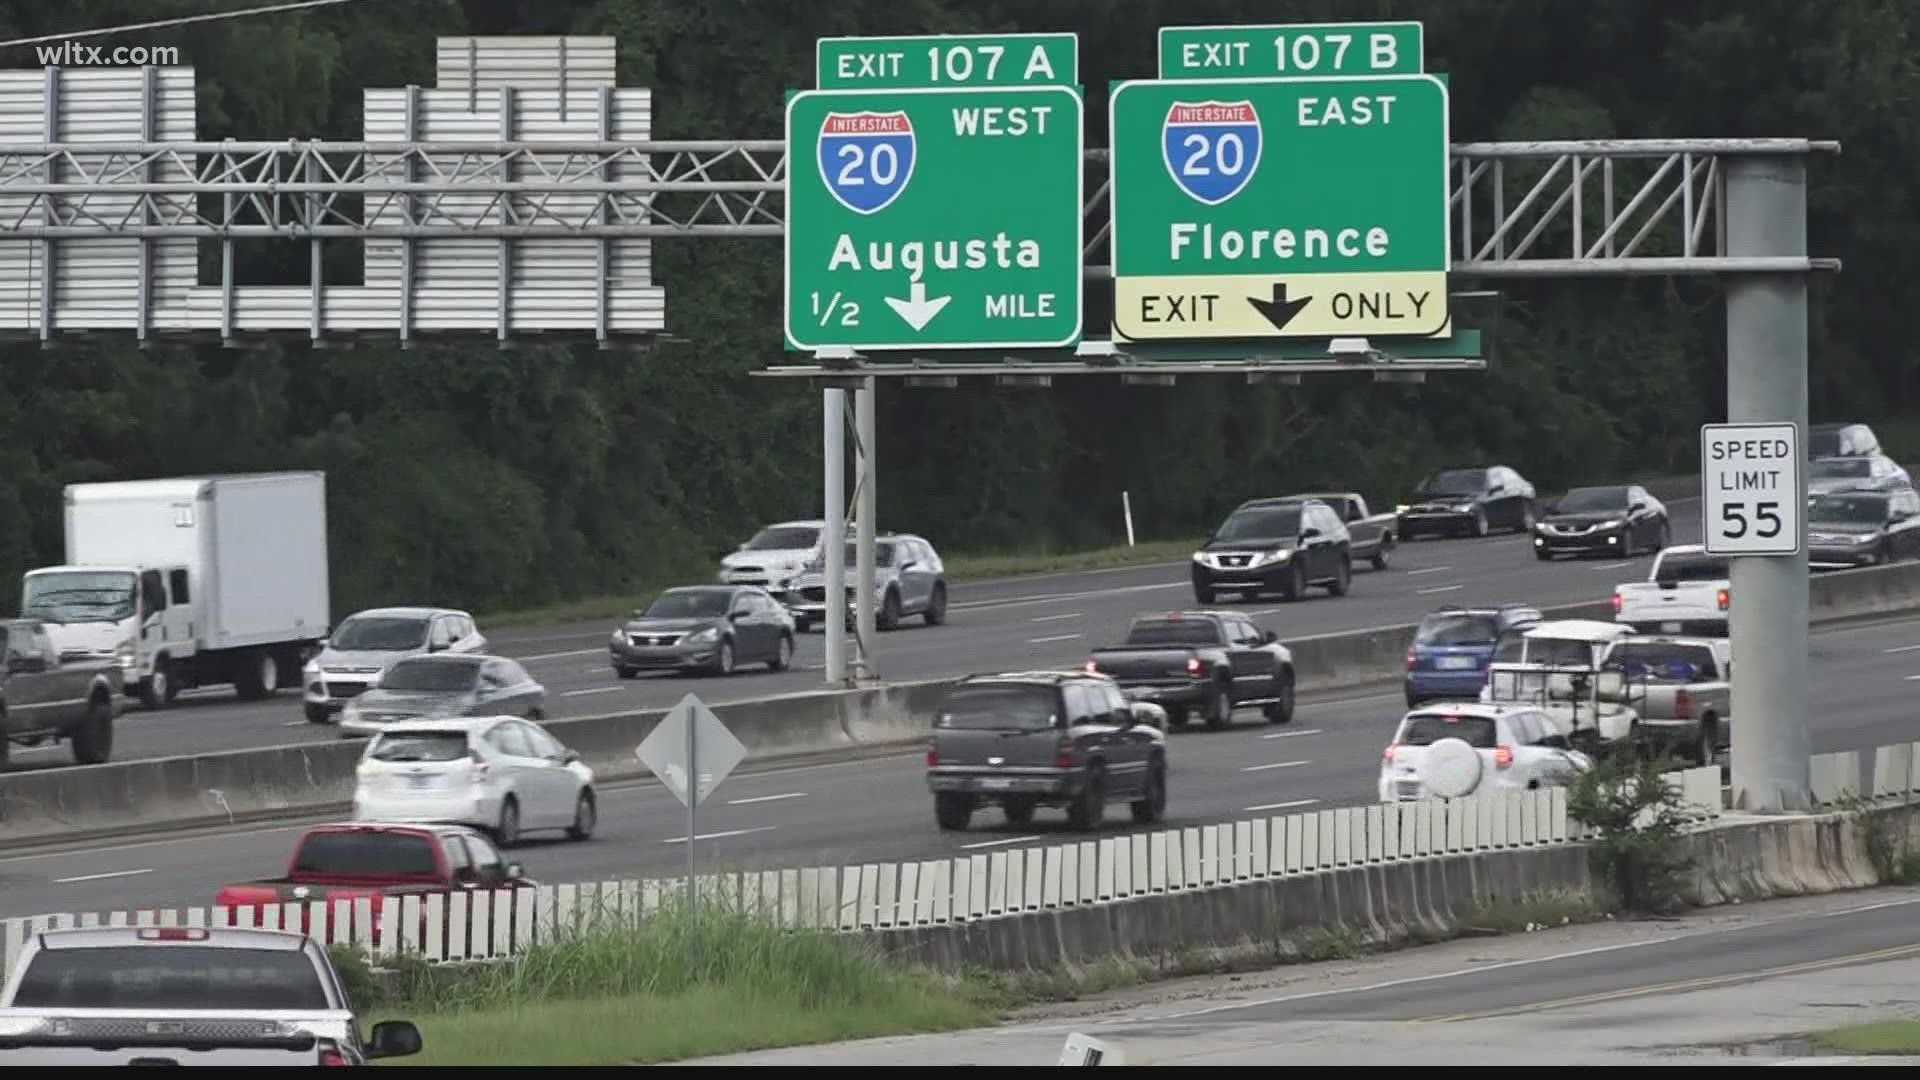 The Carolina Crossroads project is making headway in fixing the infamous 'malfunction junction' in the I-20, I-26 and I-126 corridor.